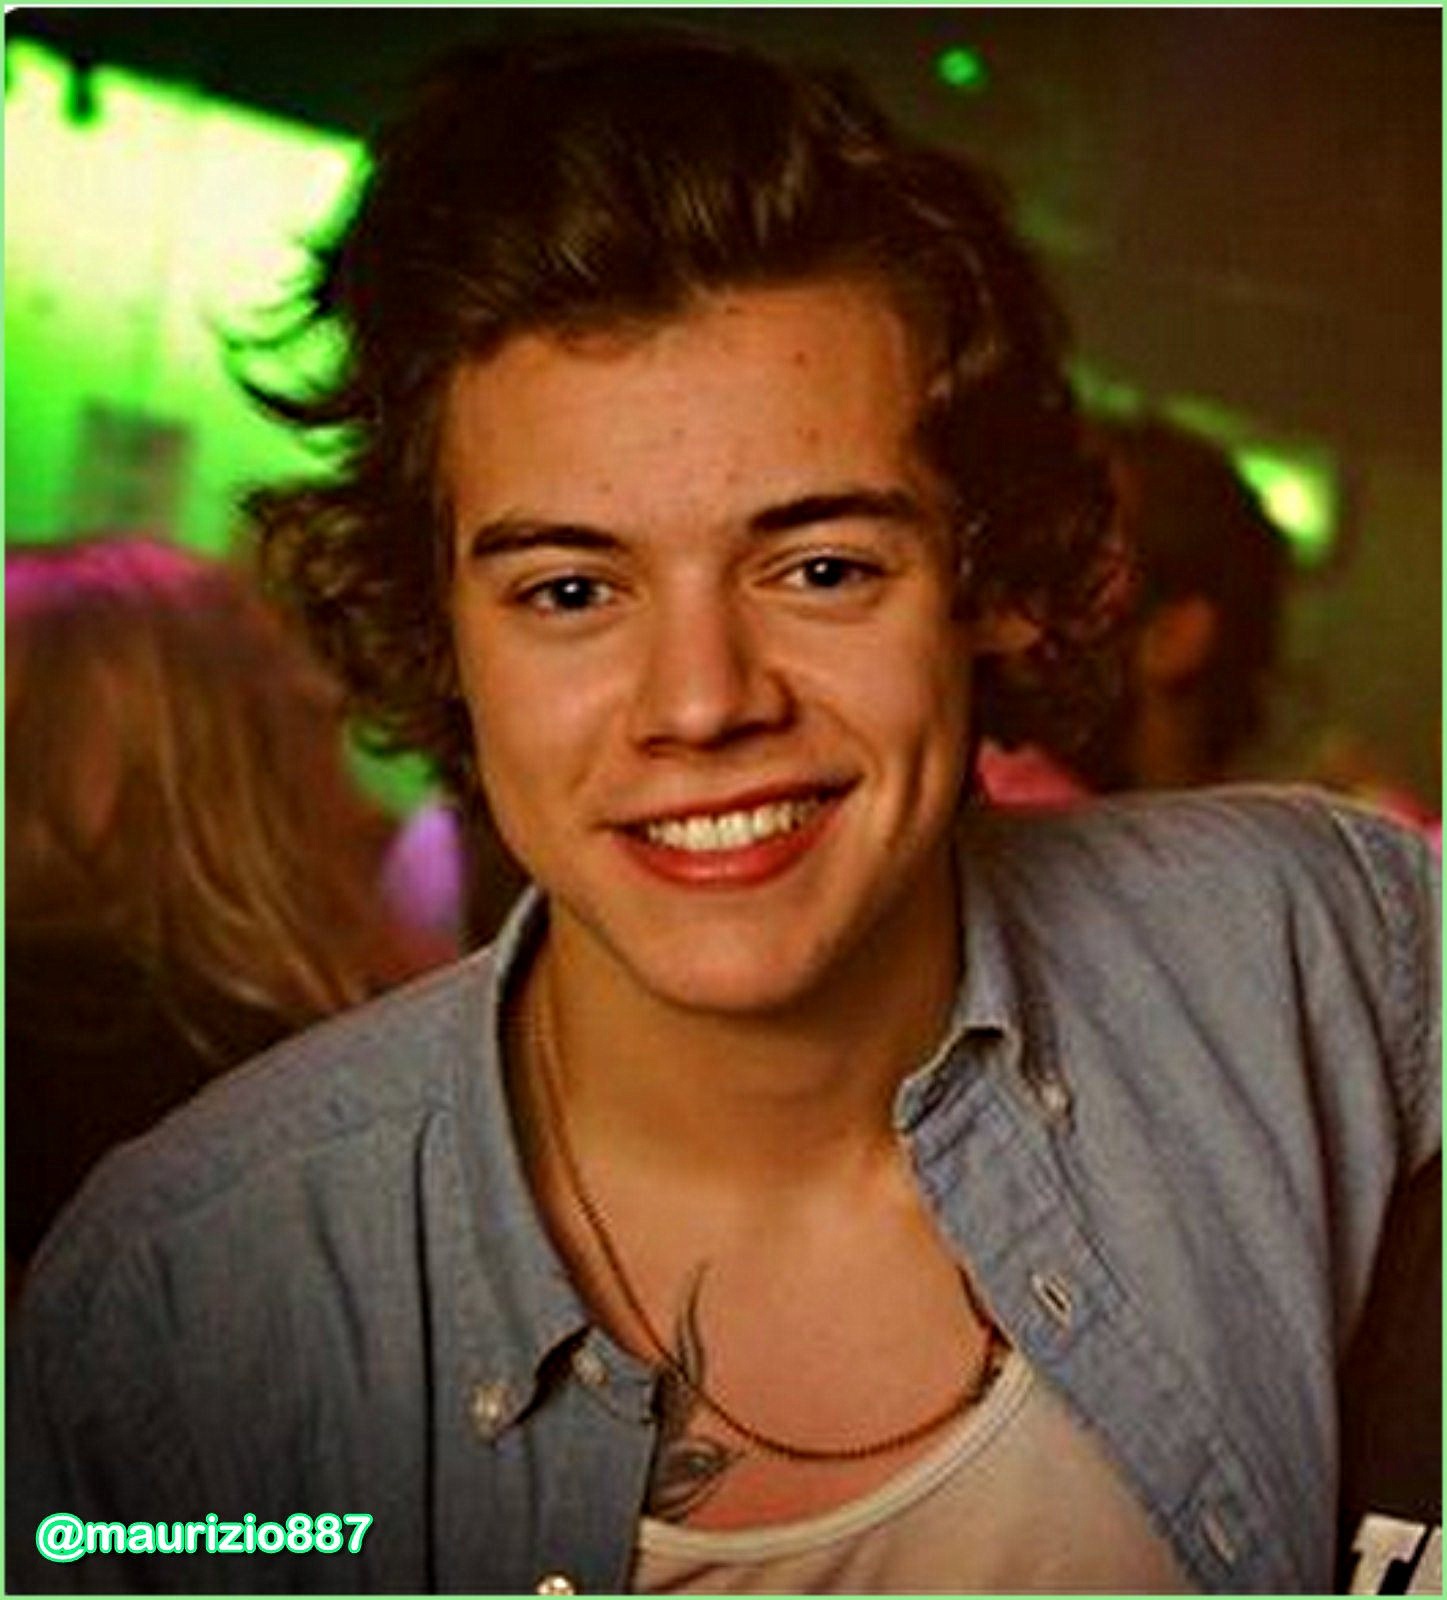 http://images6.fanpop.com/image/photos/33600000/Harry-styles-2013-one-direction-33655298-1447-1600.jpg